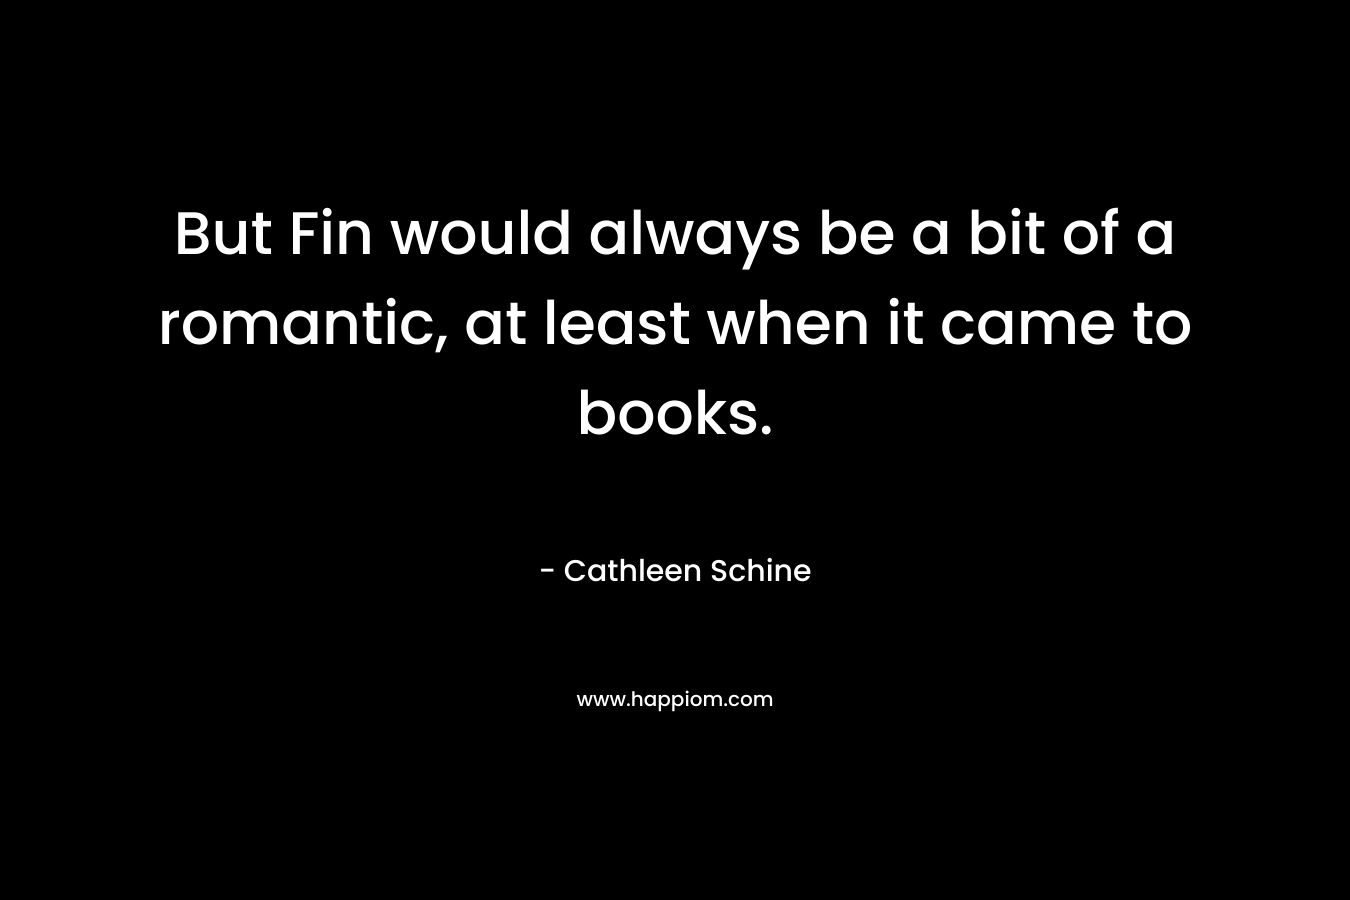 But Fin would always be a bit of a romantic, at least when it came to books. – Cathleen Schine